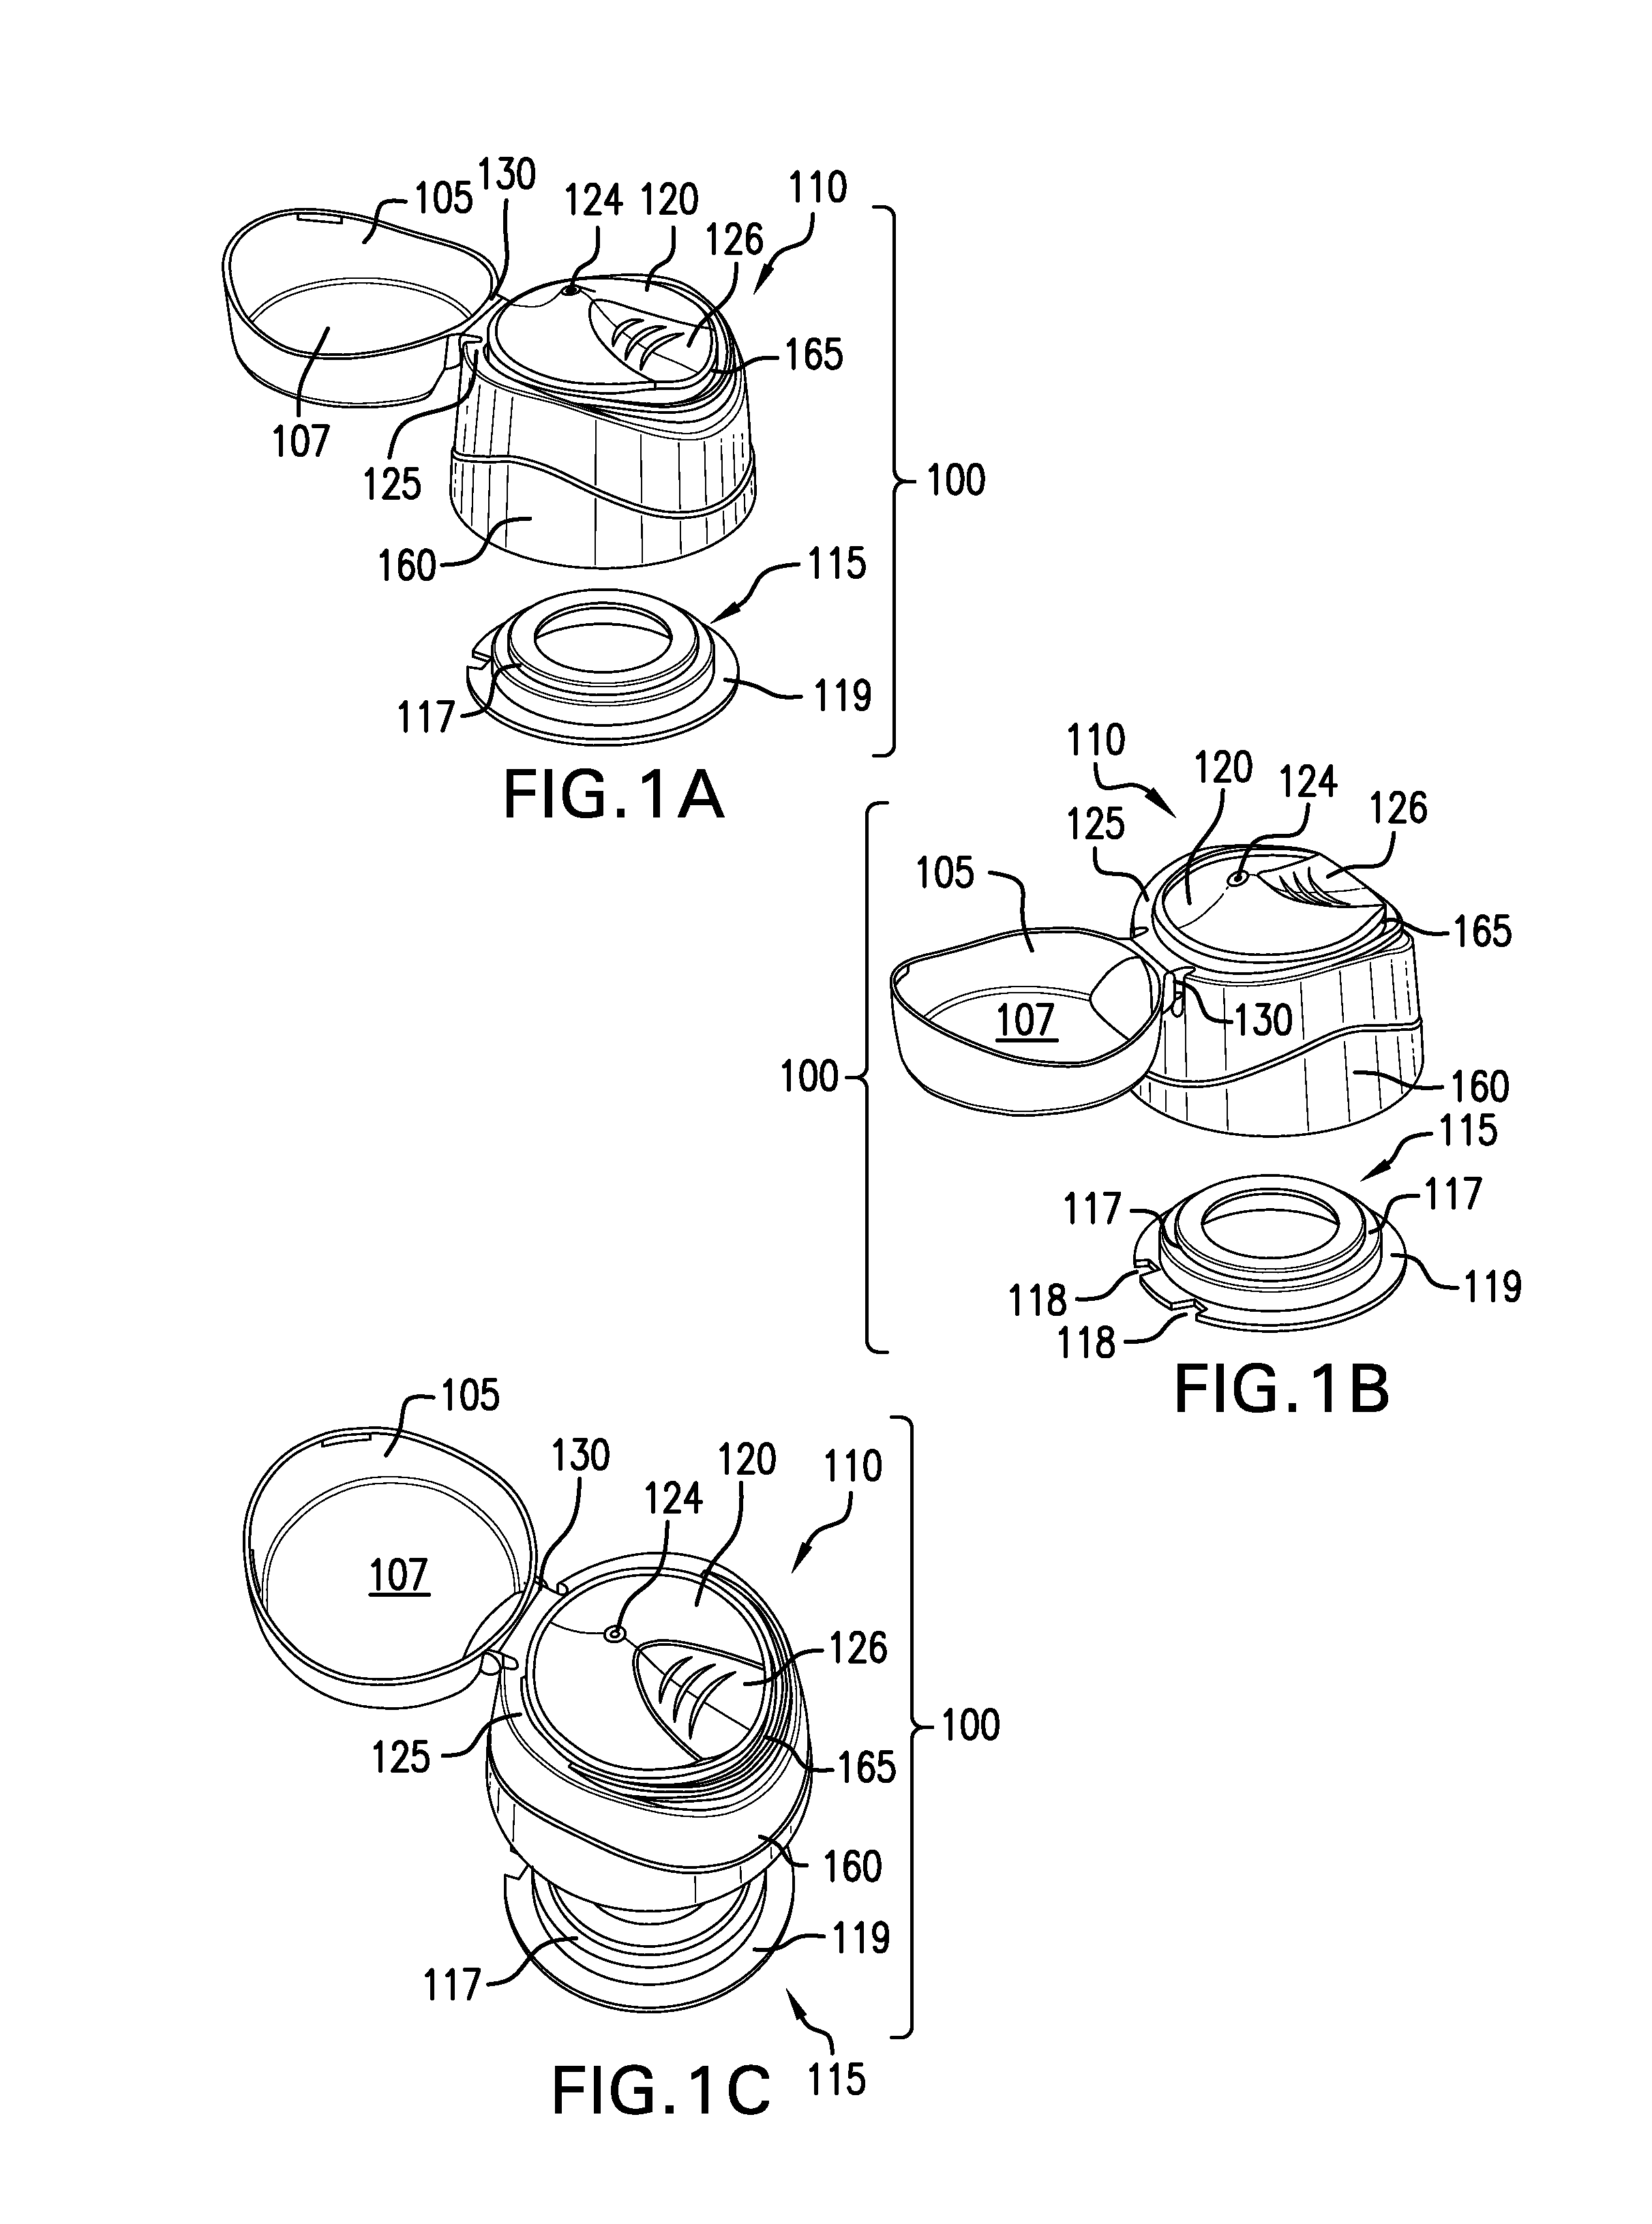 Actuator assembly for a pressurized plastic vessel